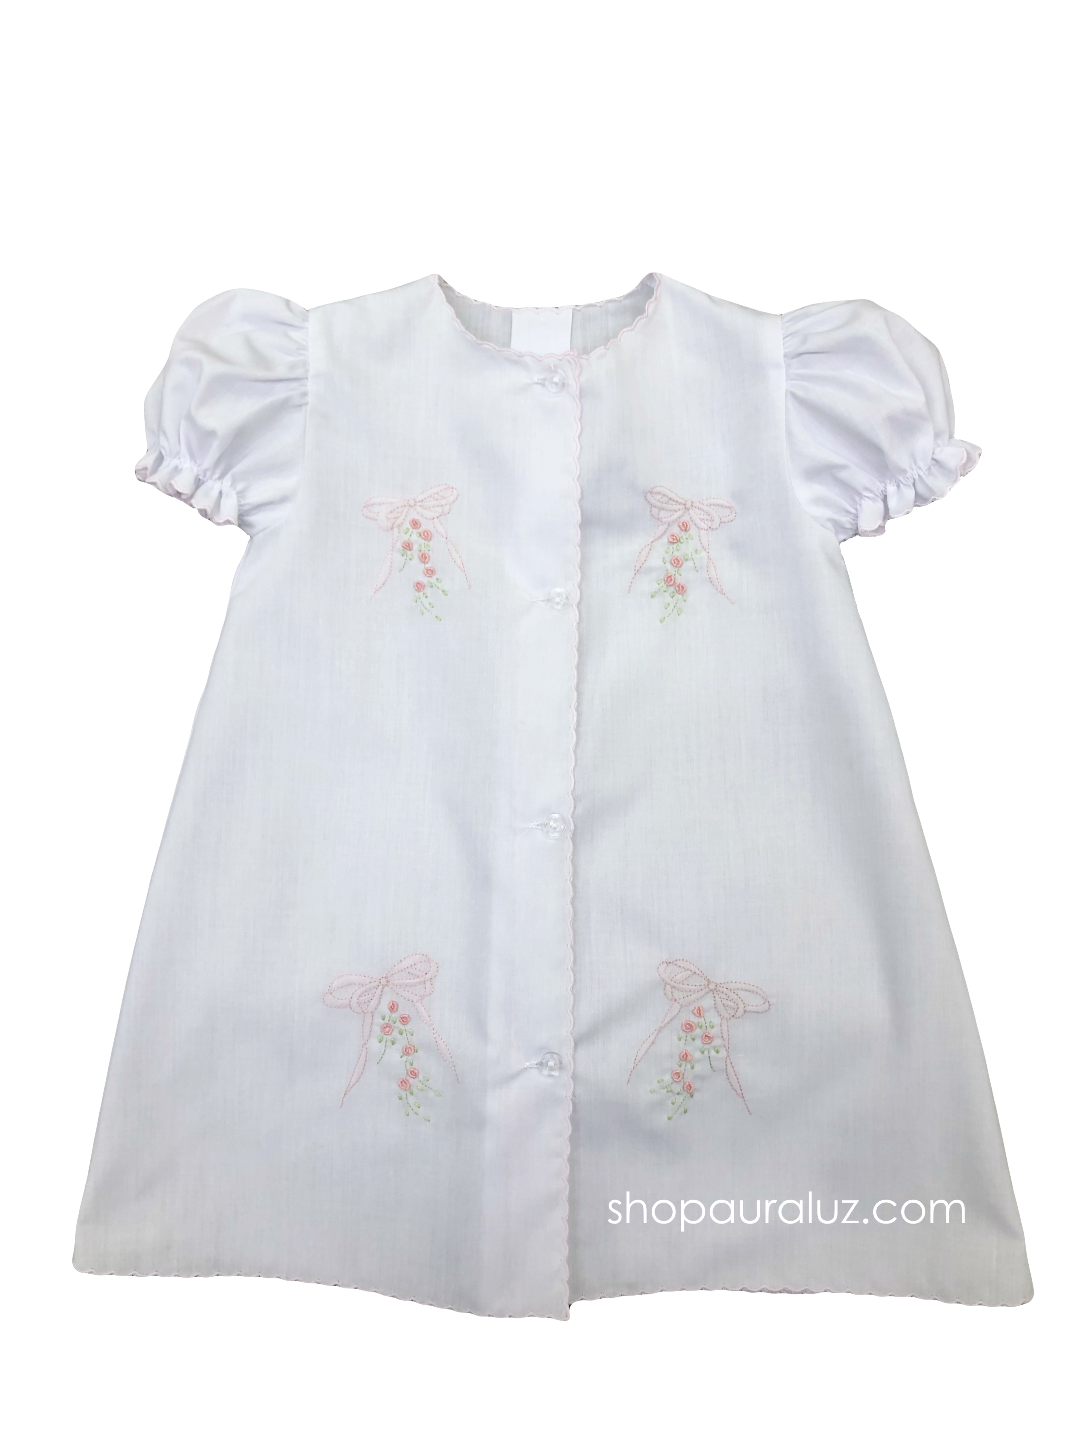 Auraluz Day Gown..White with pink scallops and embroidered ribbon bows